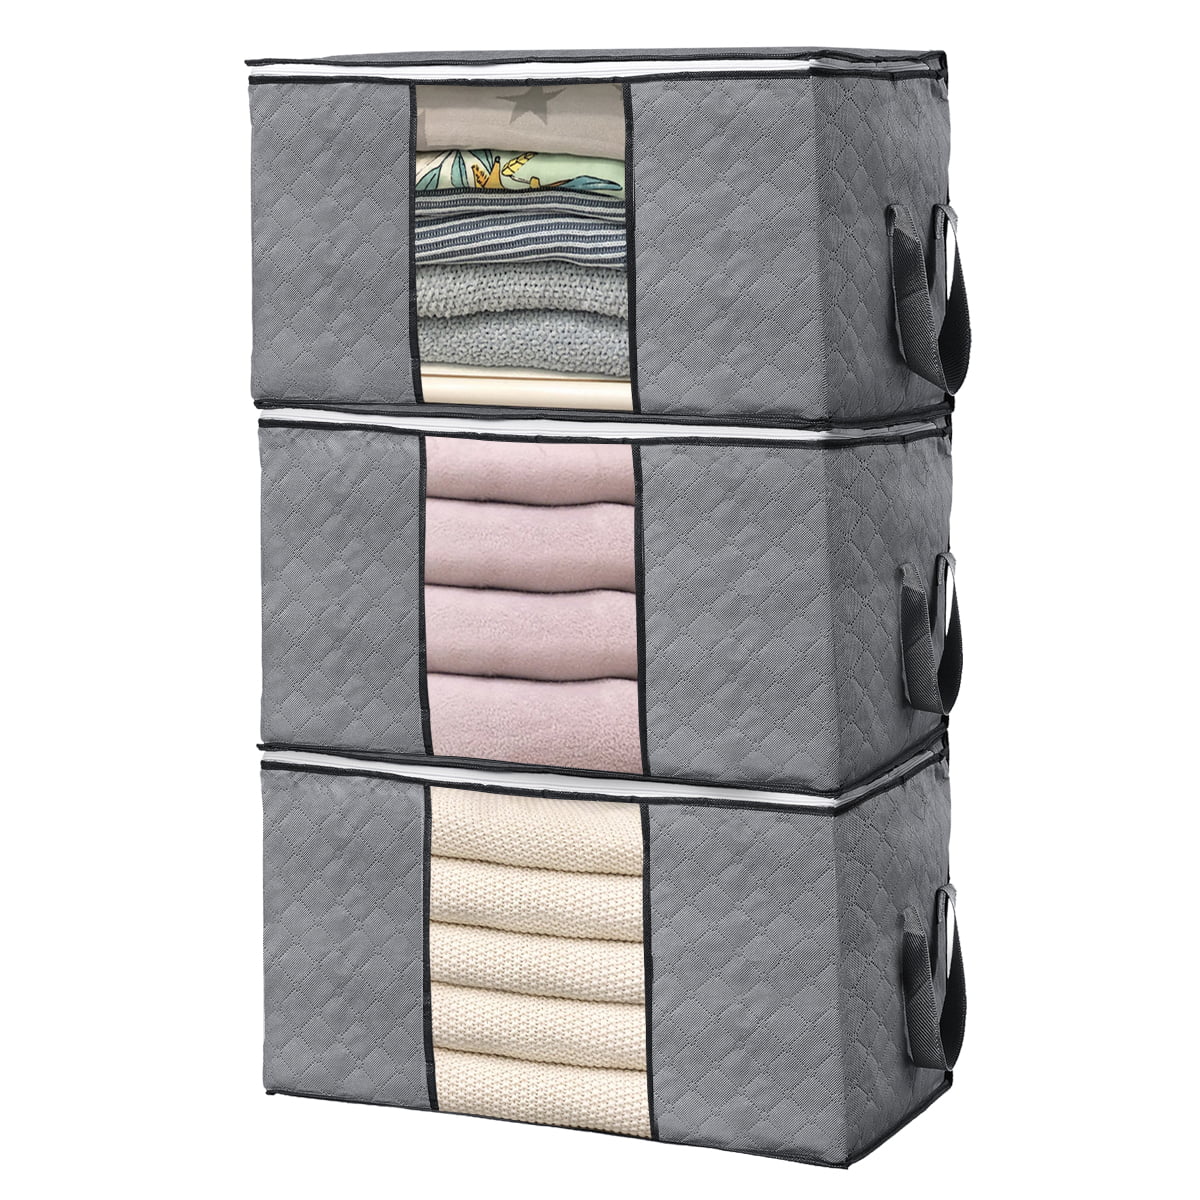 Large Capacity Clothes Storage Bag Organizer with Reinforced 